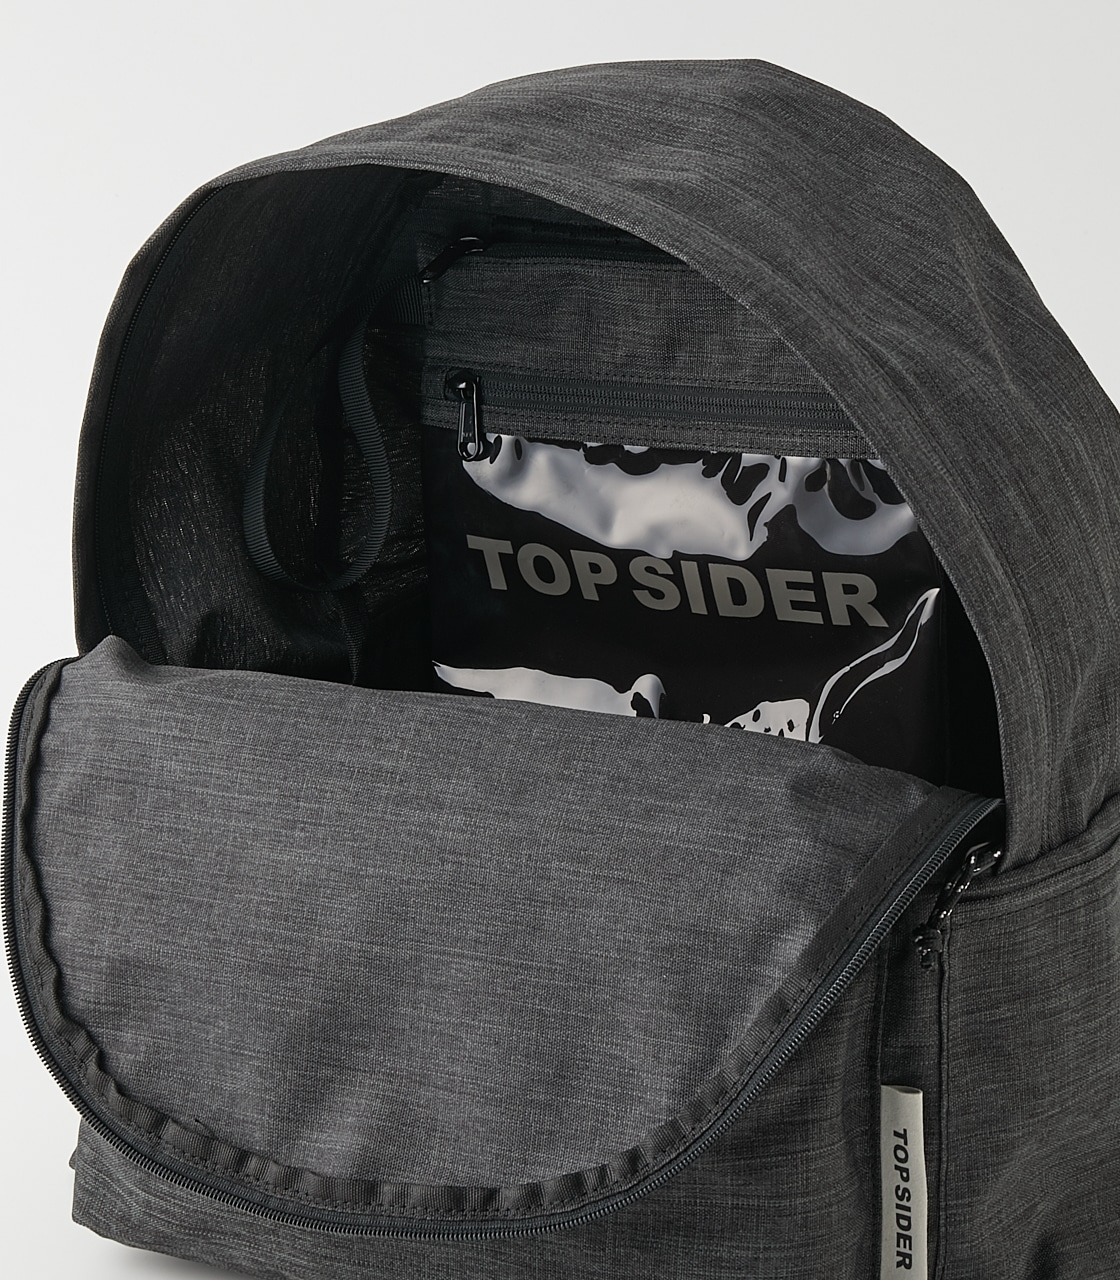 TOP SIDER×AZUL BACKPACK/TOP SIDER×AZULバックパック 詳細画像 C.GRY 6